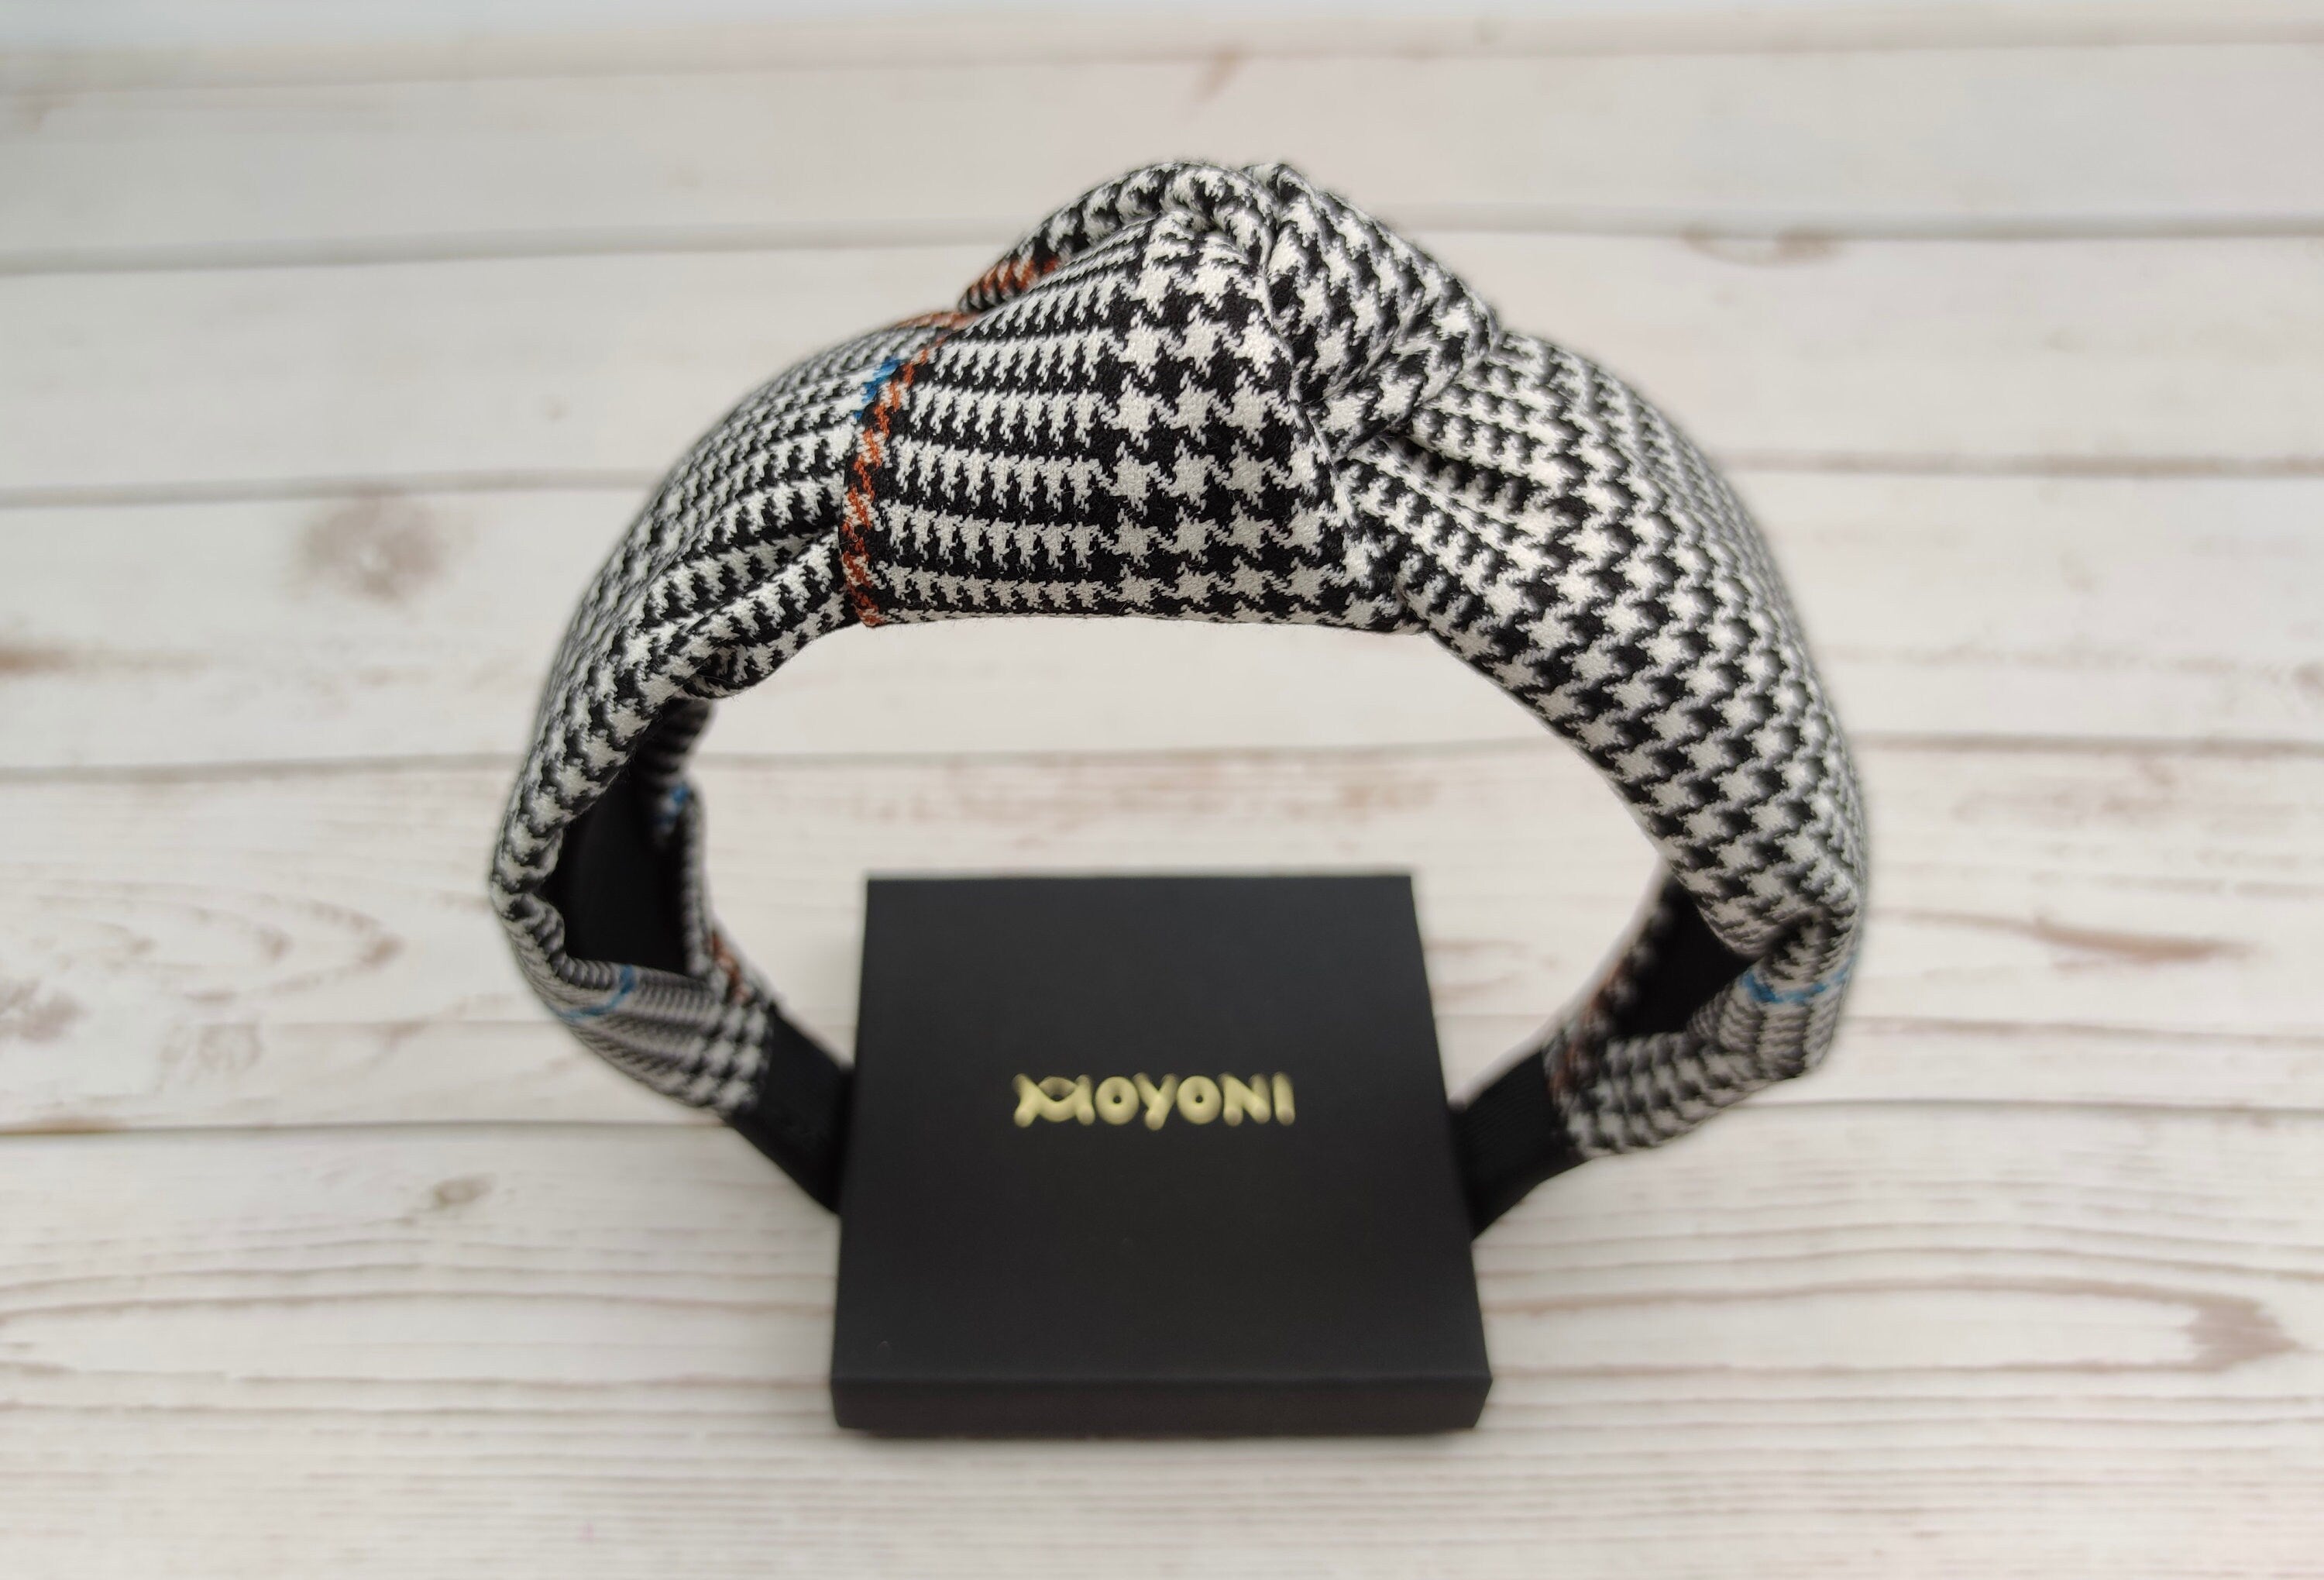 Elevate your hair game with this classic white and black crepe-knotted headband, a must-have accessory for women.